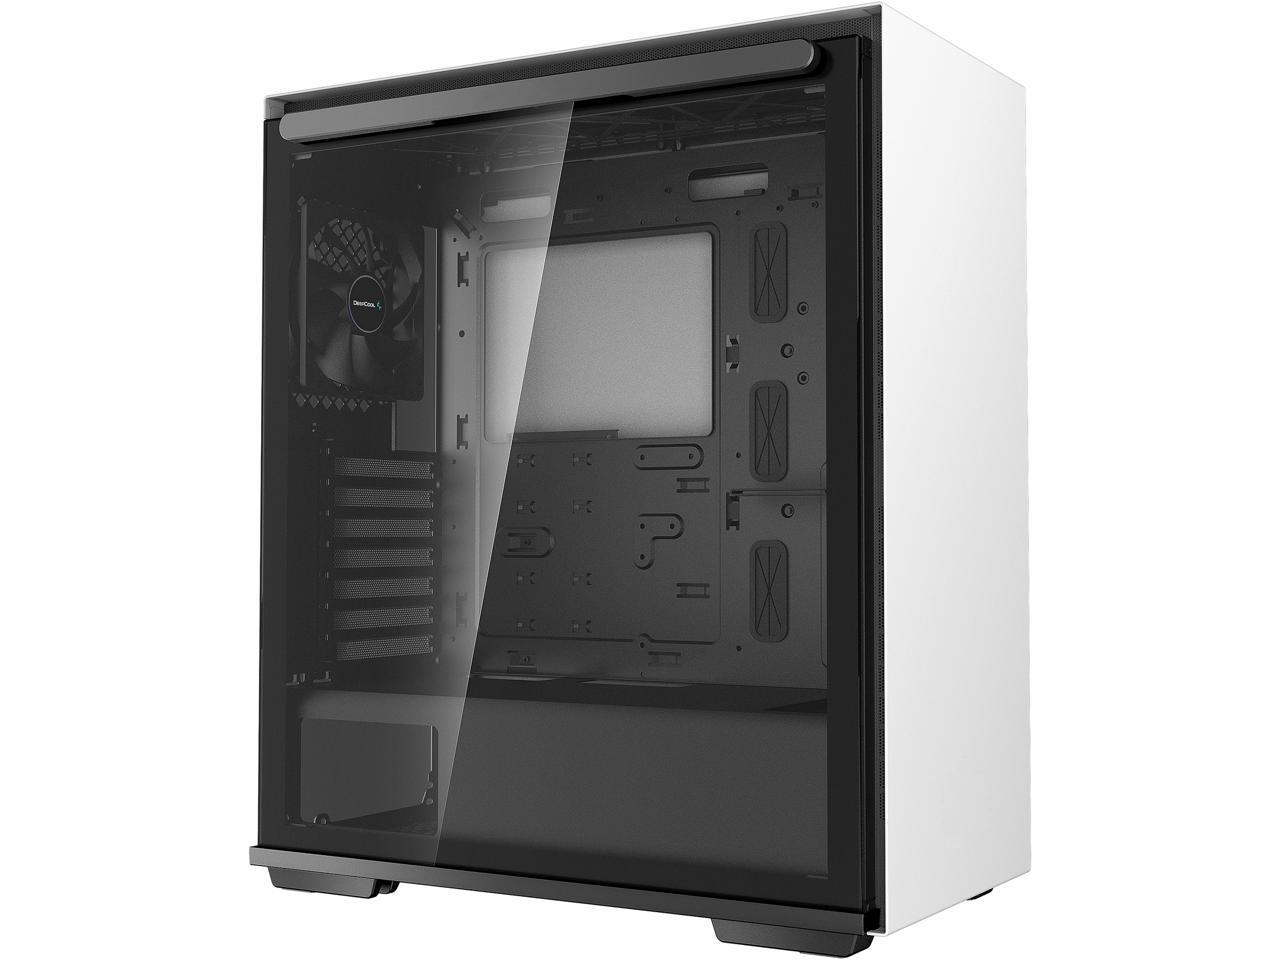 DEEPCOOL MACUBE 310 Magnetic Tempered Glass Mid Tower Case w/Built-in Fan Hub $37